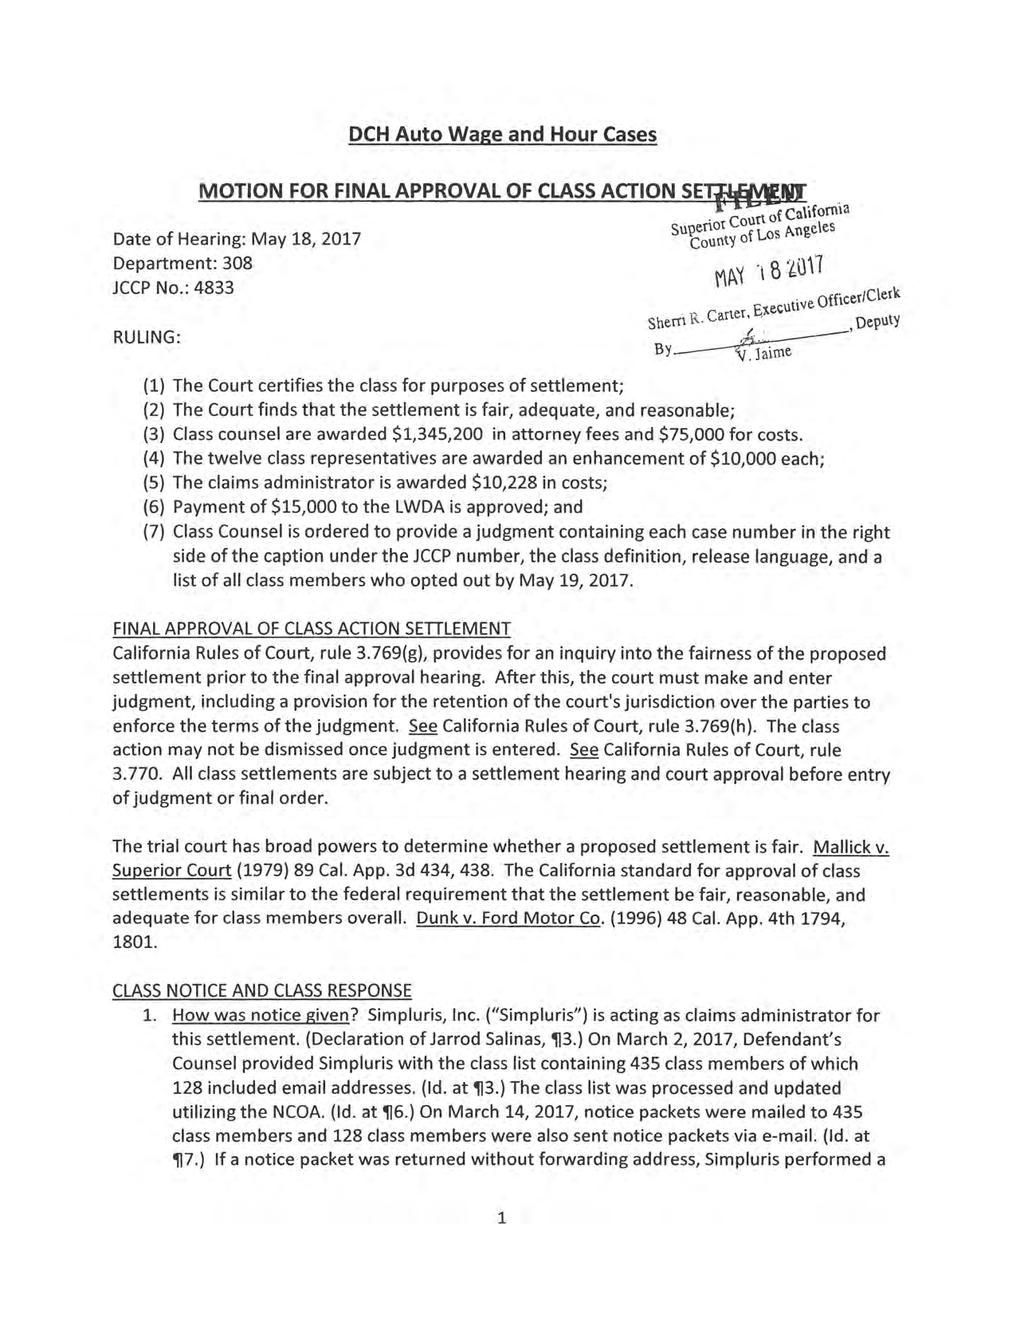 DCH Auto Wage and Hour Cases MOTION FOR FINAL APPROVAL OF CLASS ACTION SE~IUT.. rt of Ca\ifonna Date of Hearing: May 18, 2017 Department: 308 JCCP No.: 4833 RULING: supenor couf LOS p.